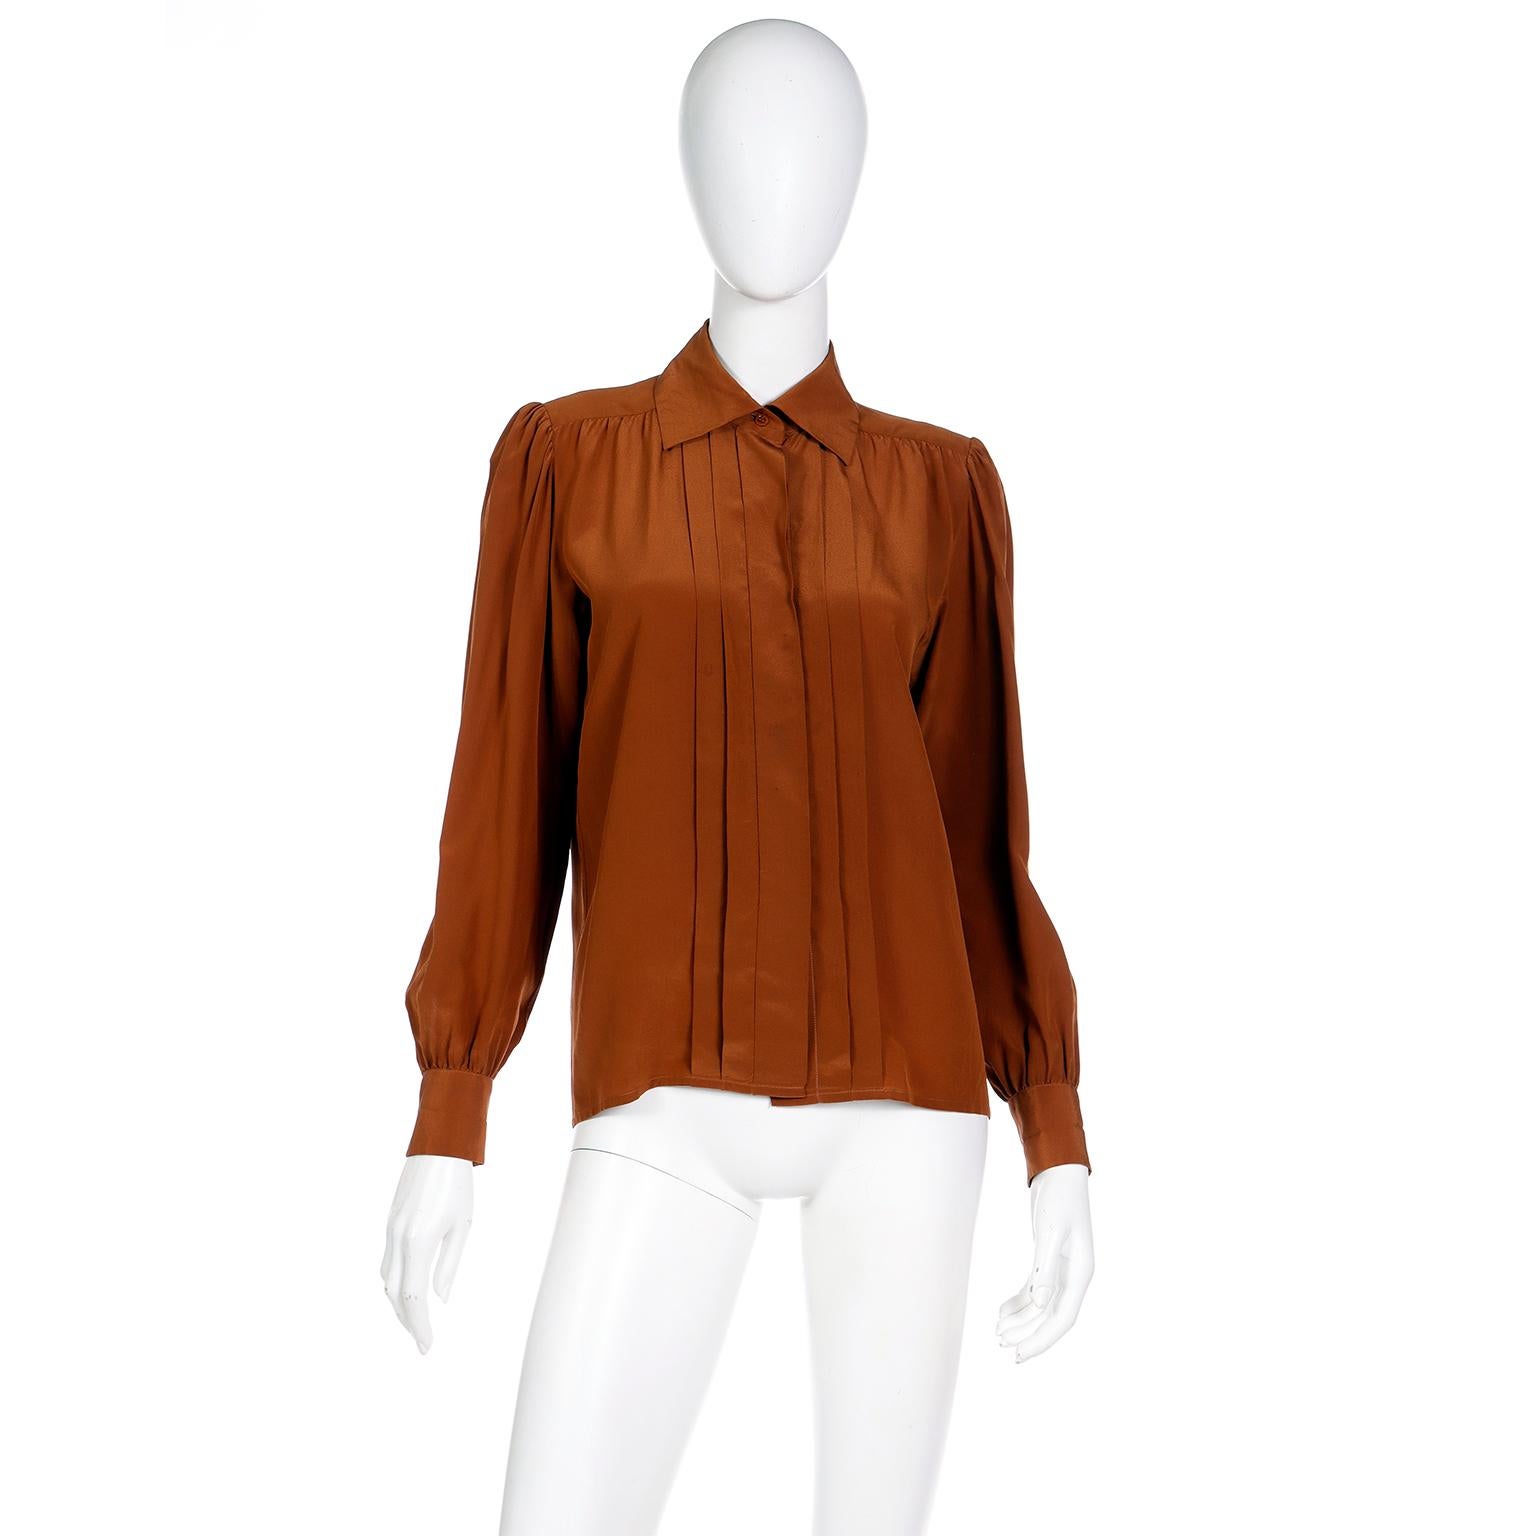 There is nothing quite like a vintage Yves Saint Laurent blouse! We have sold hundreds of them and they never disappoint! This luxe brown silk YSL blouse was made In France in the late 1970's and is in a rich coffee brown hue. We love the delicate